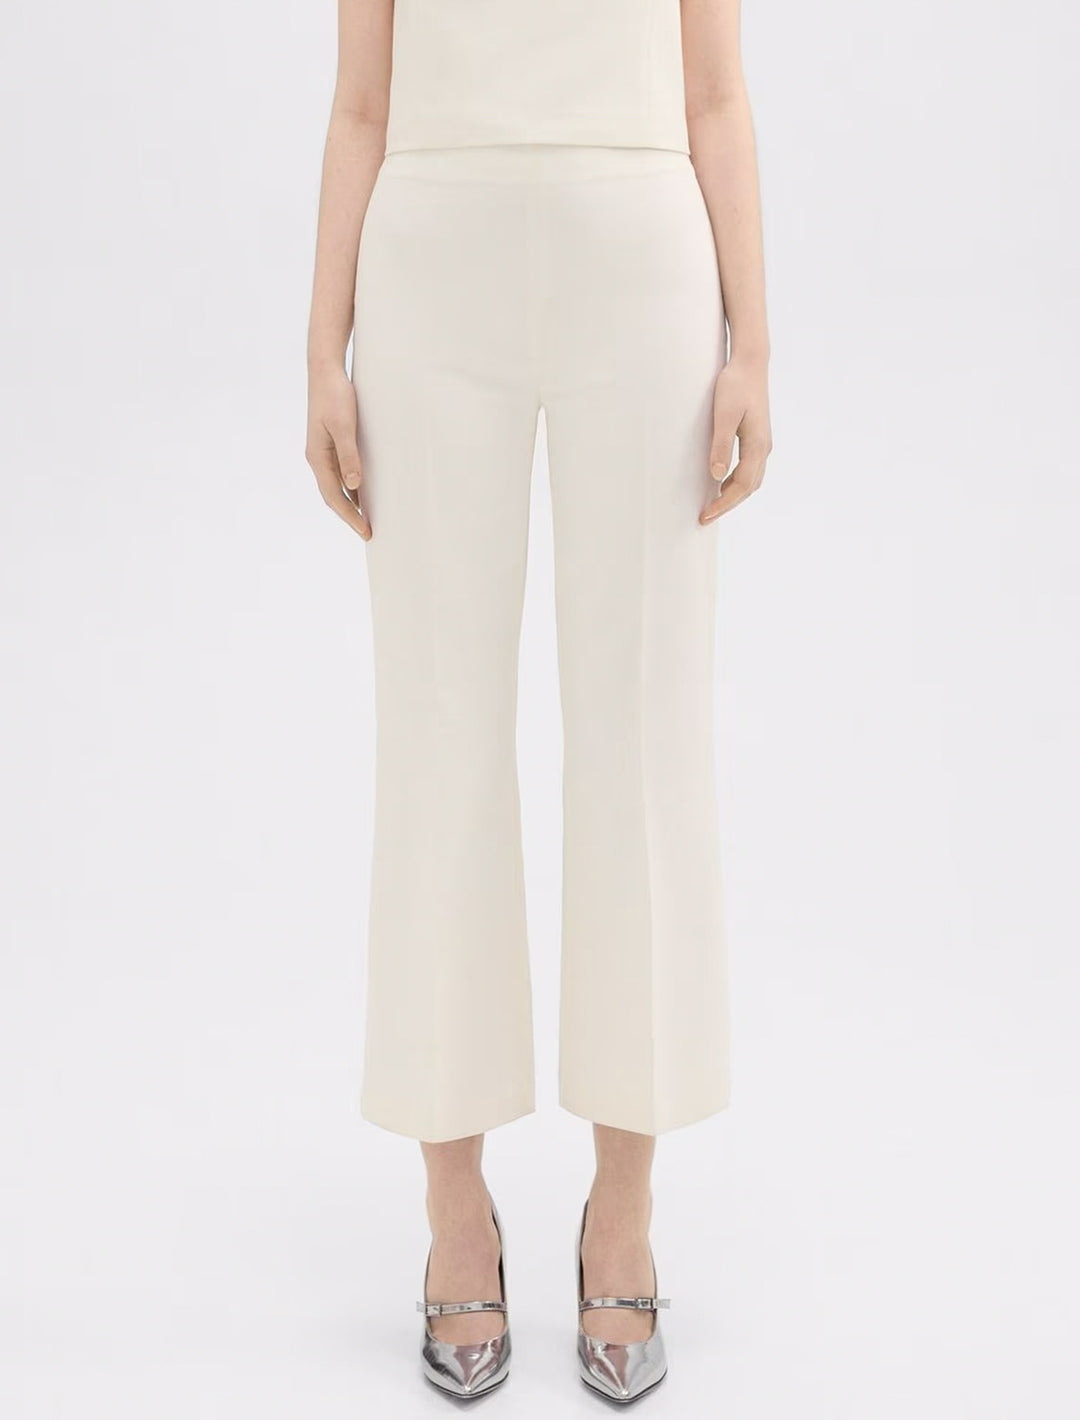 Model wearing Theory's tailored kick pant in ivory.